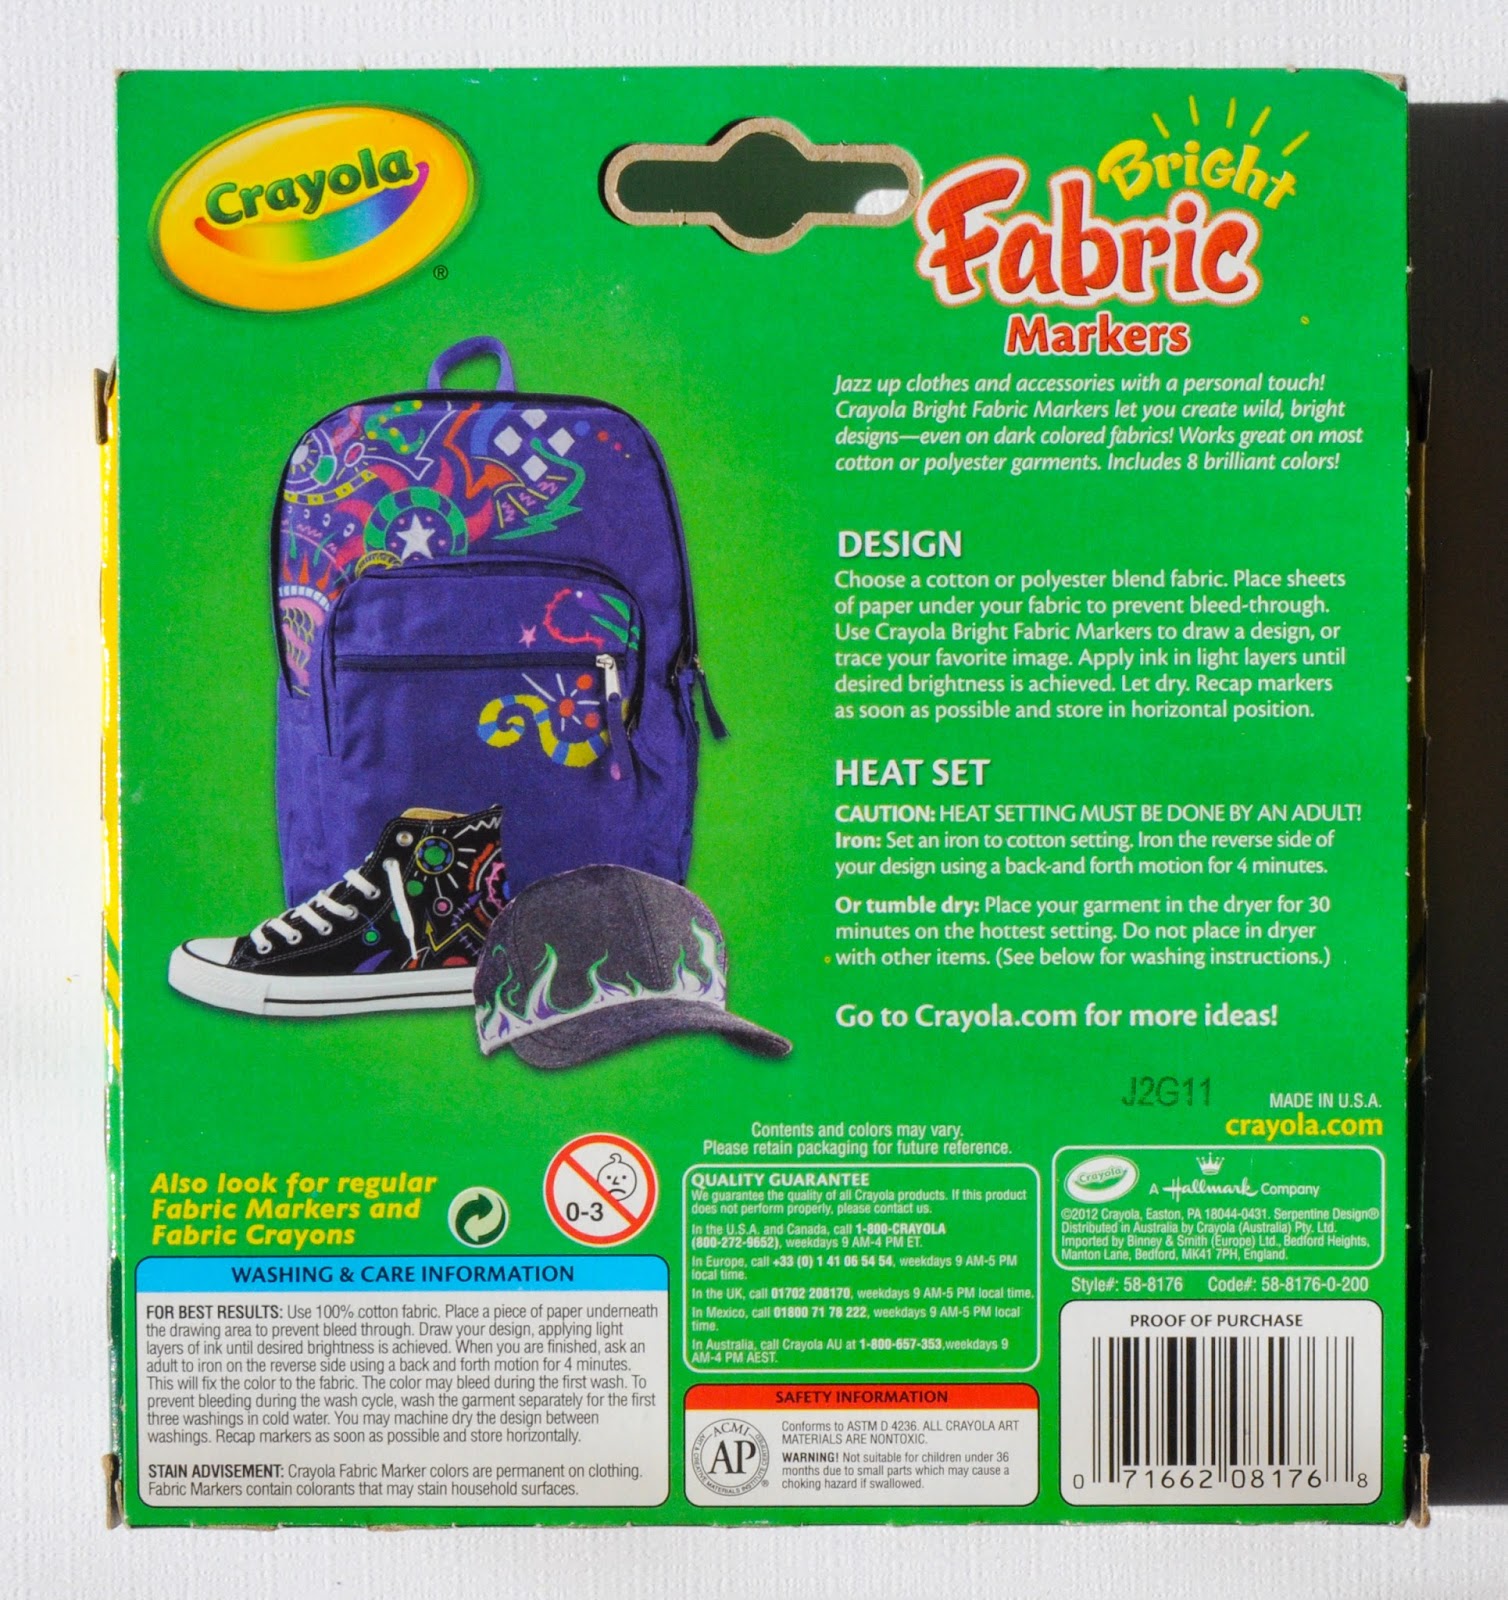 Crayola Fabric Markers: What's Inside the Box